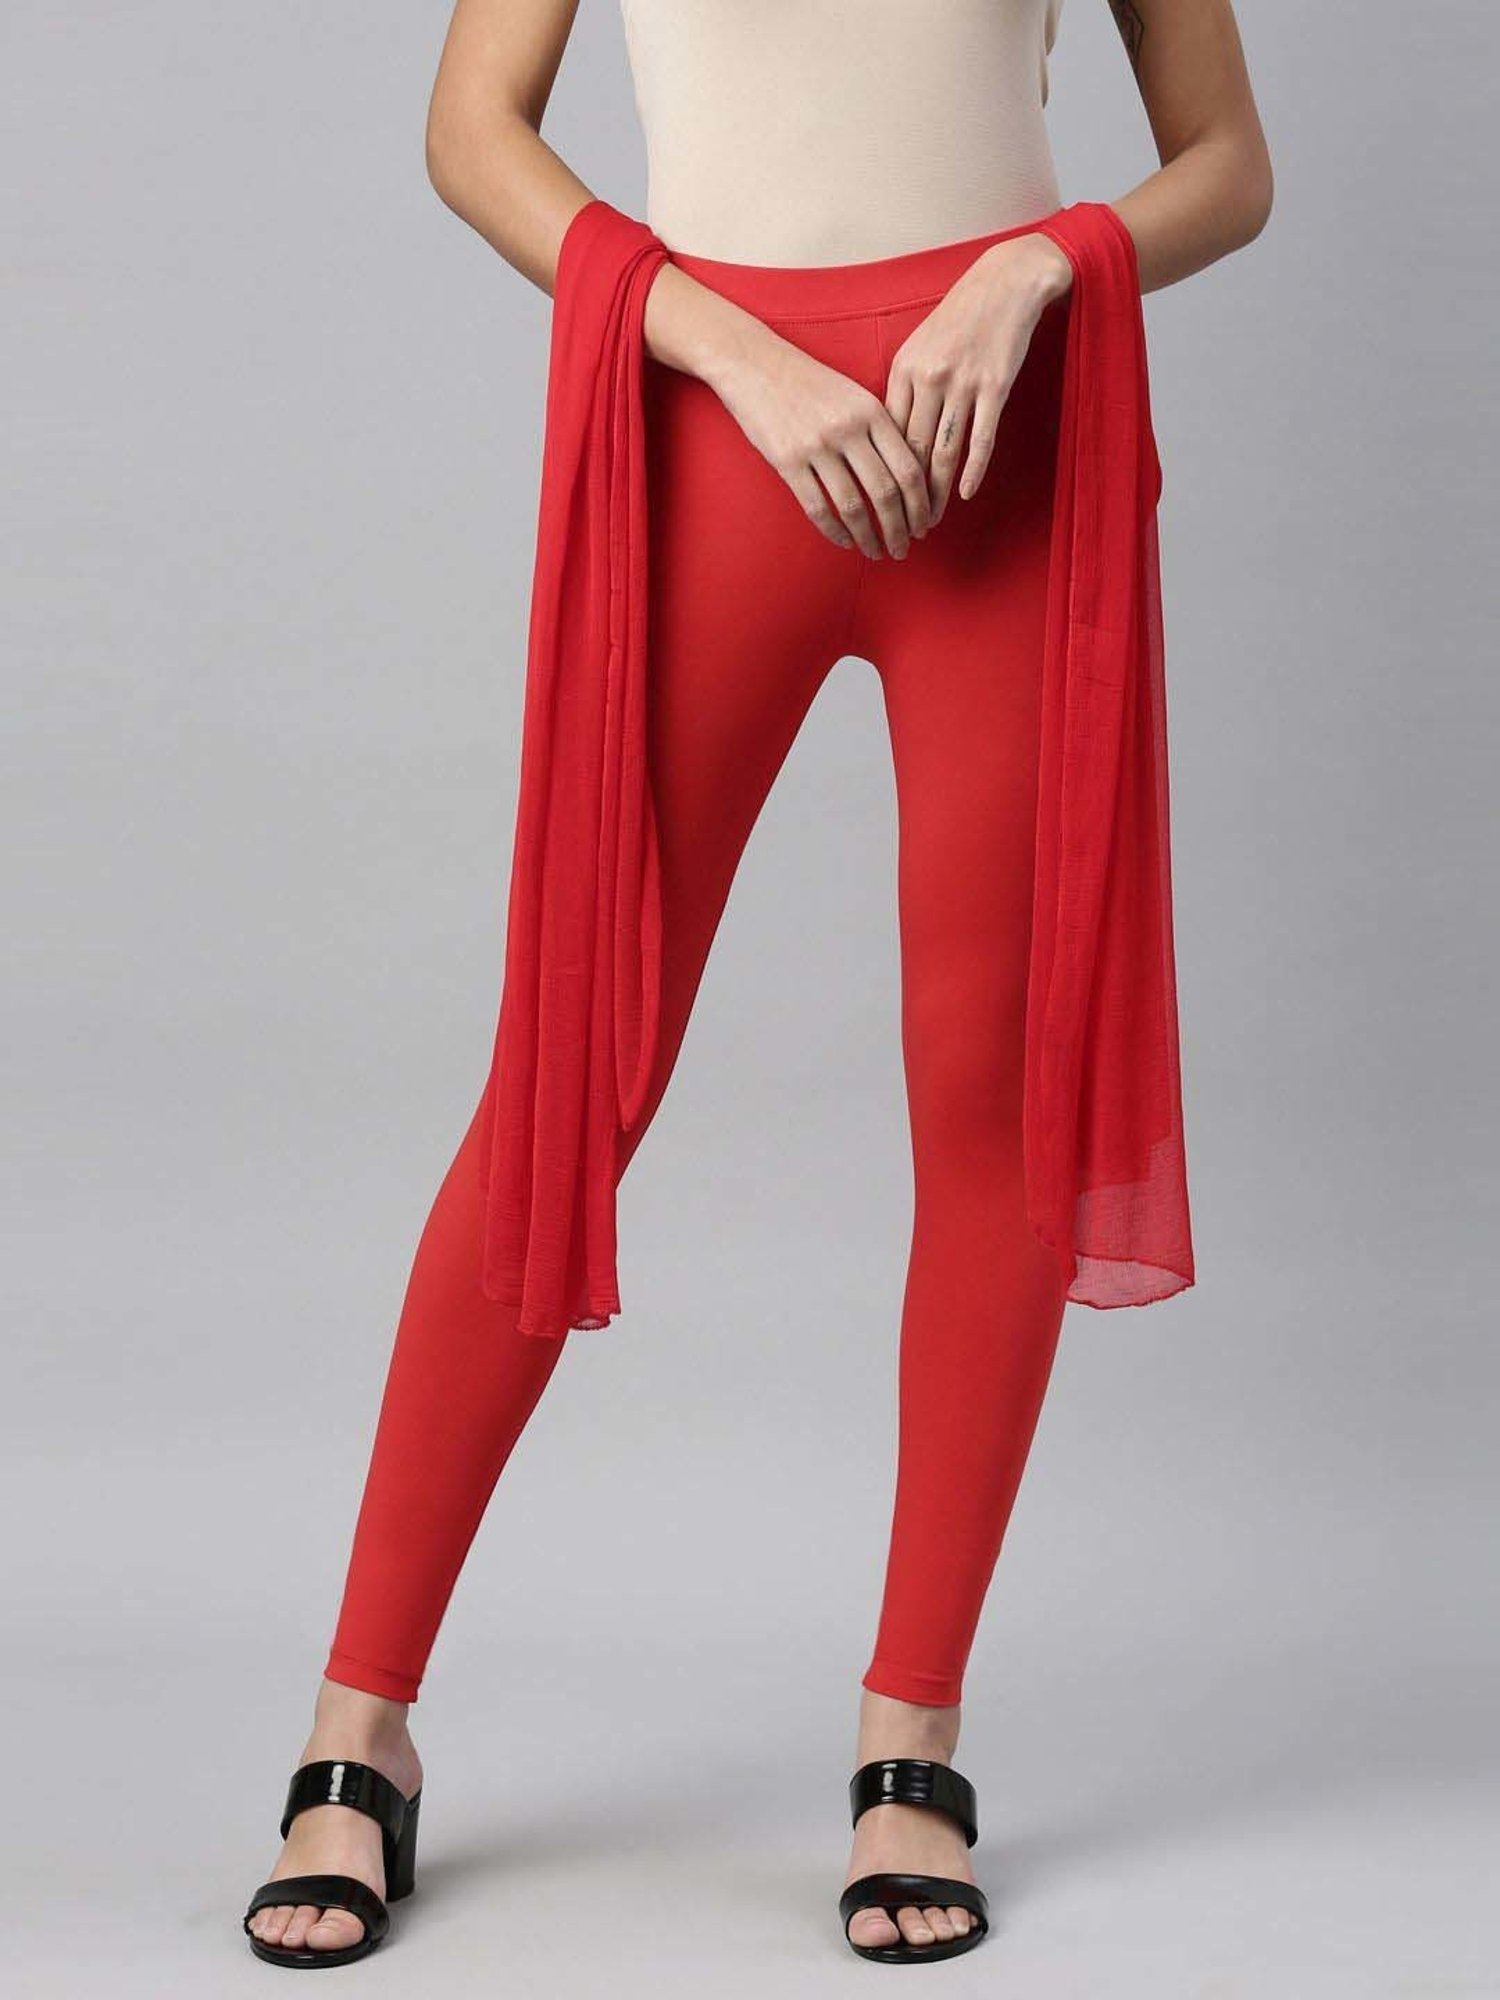 Buy TWIN BIRDS Women Red Solid Cotton Ankle-Length Leggings Online